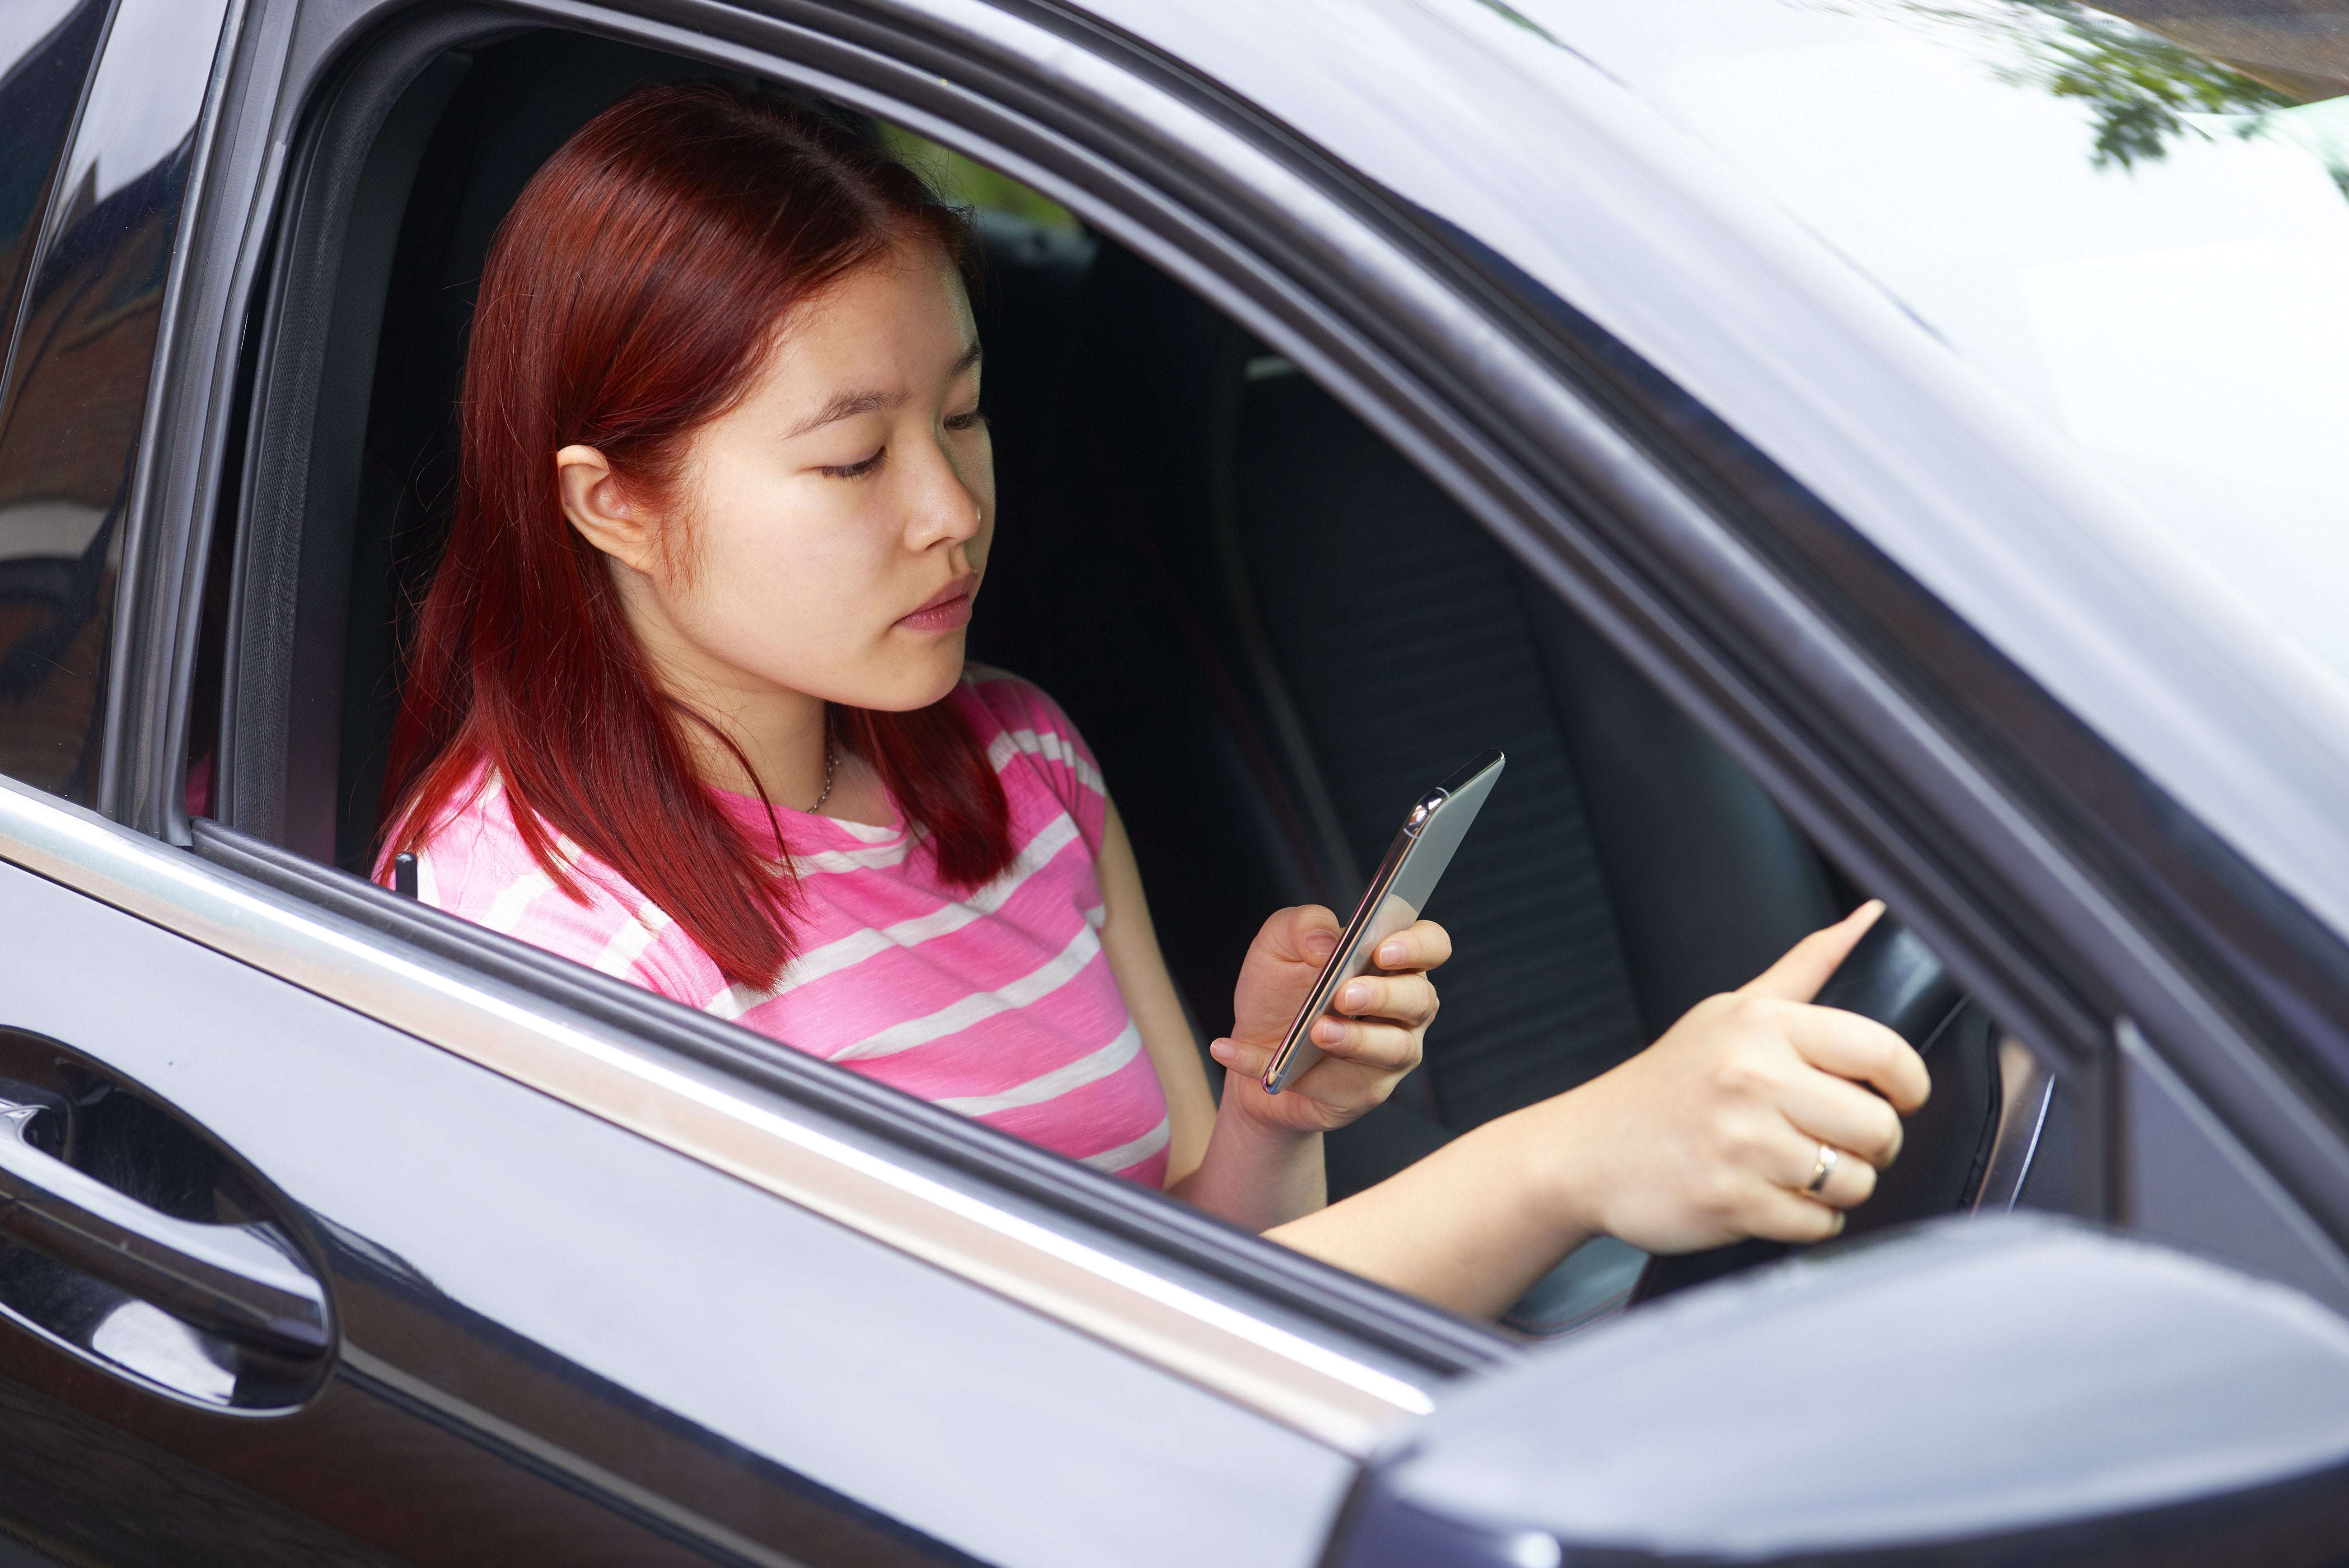 image for UK to ban any handheld use of a mobile phone behind the wheel